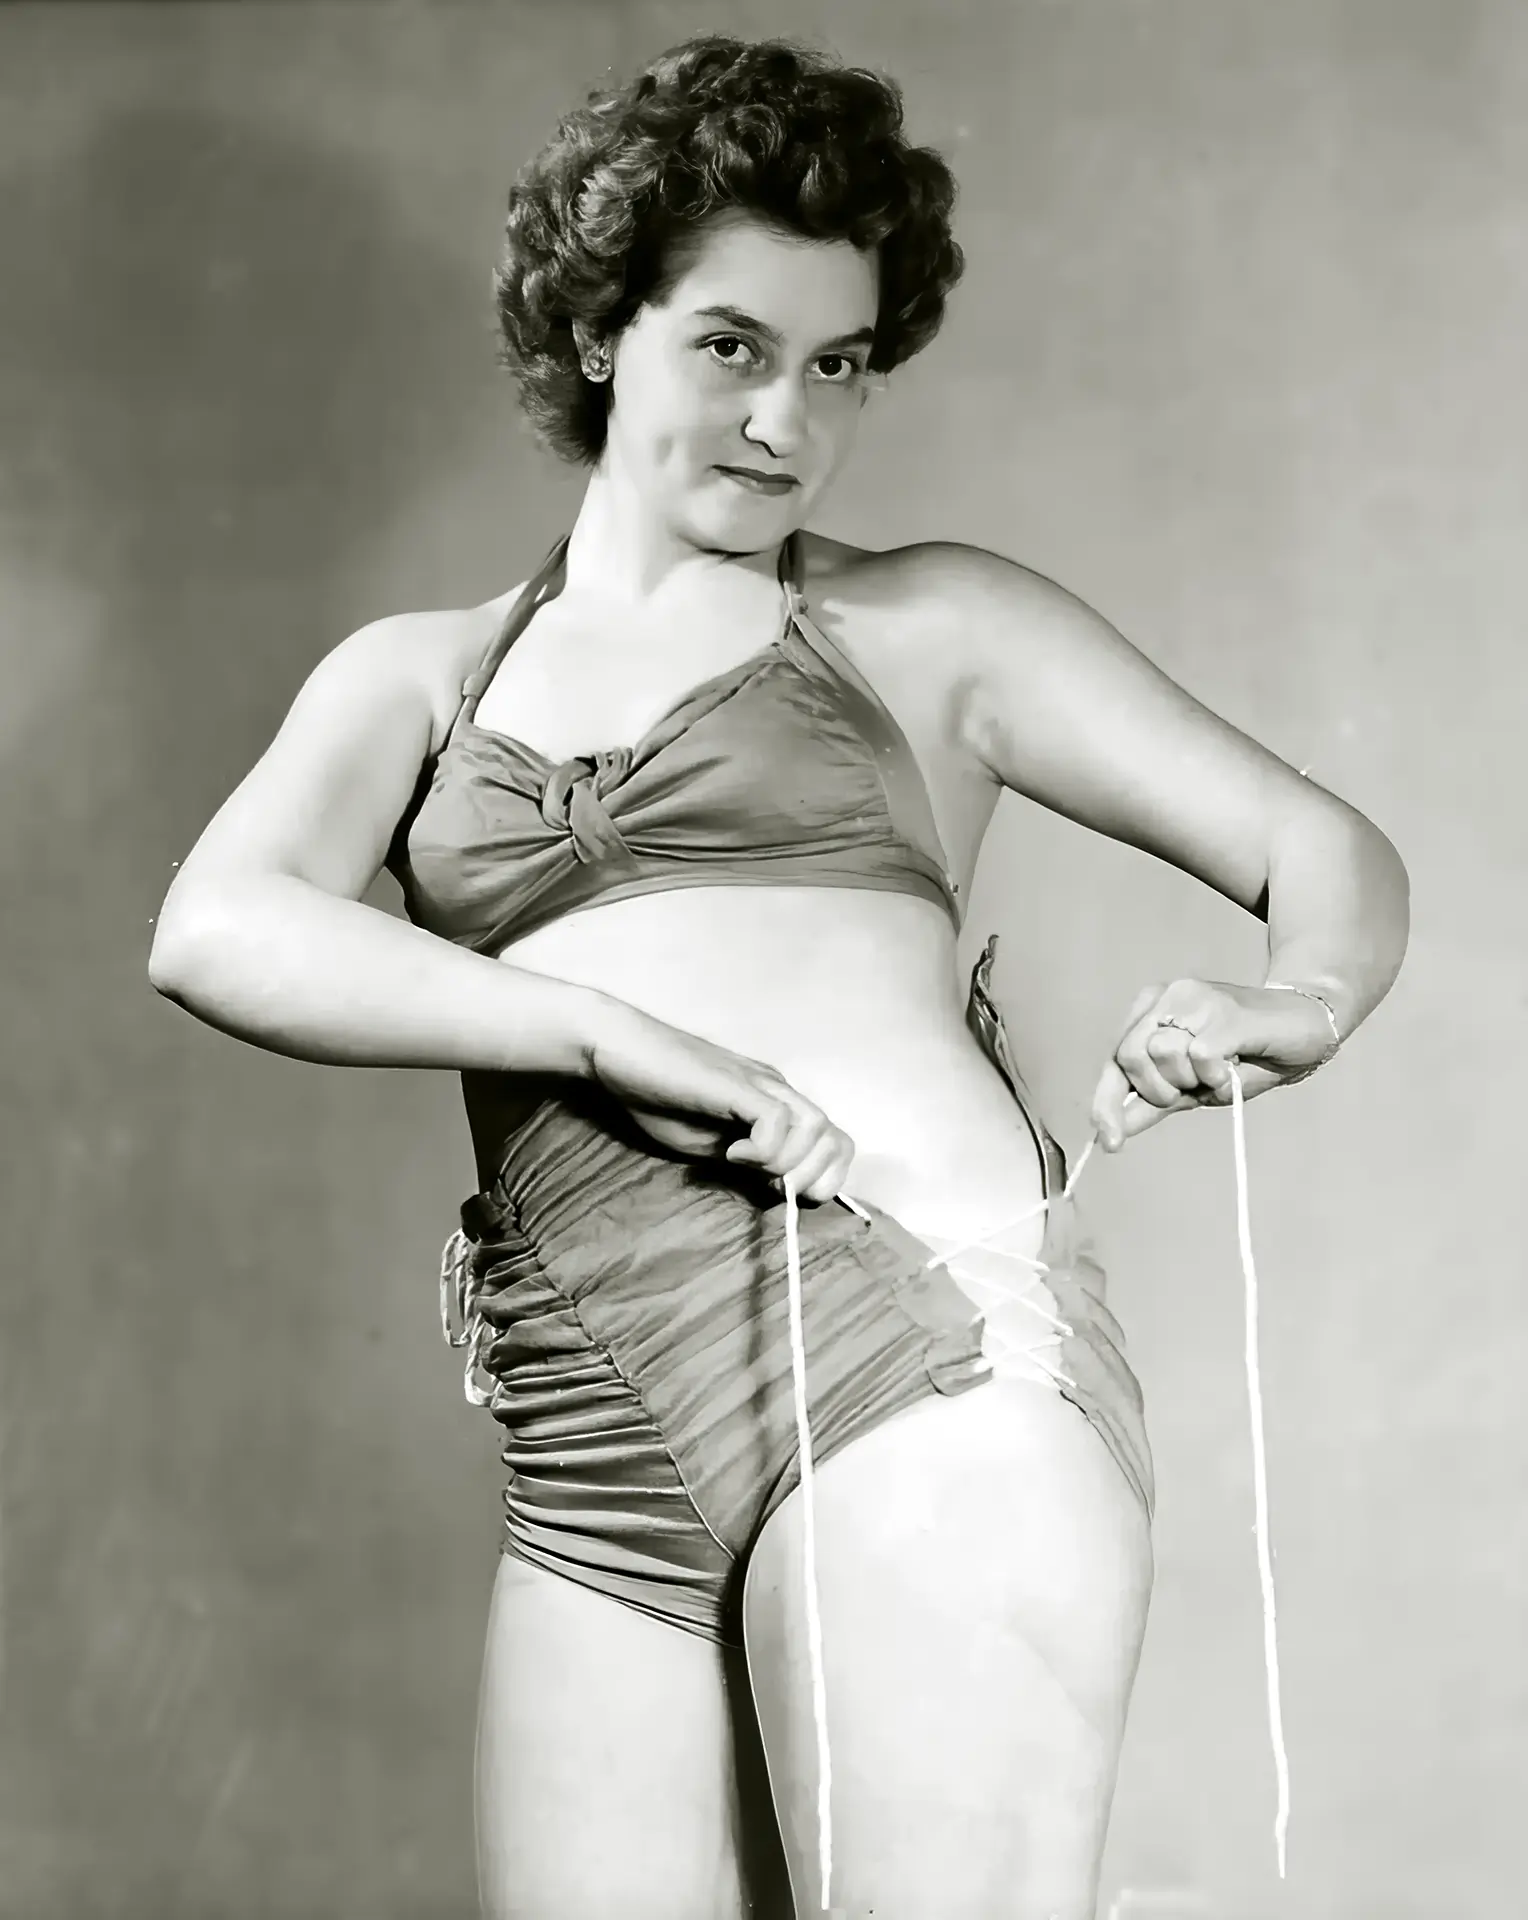 Older burlesque lady with curves tries to tie her bikini